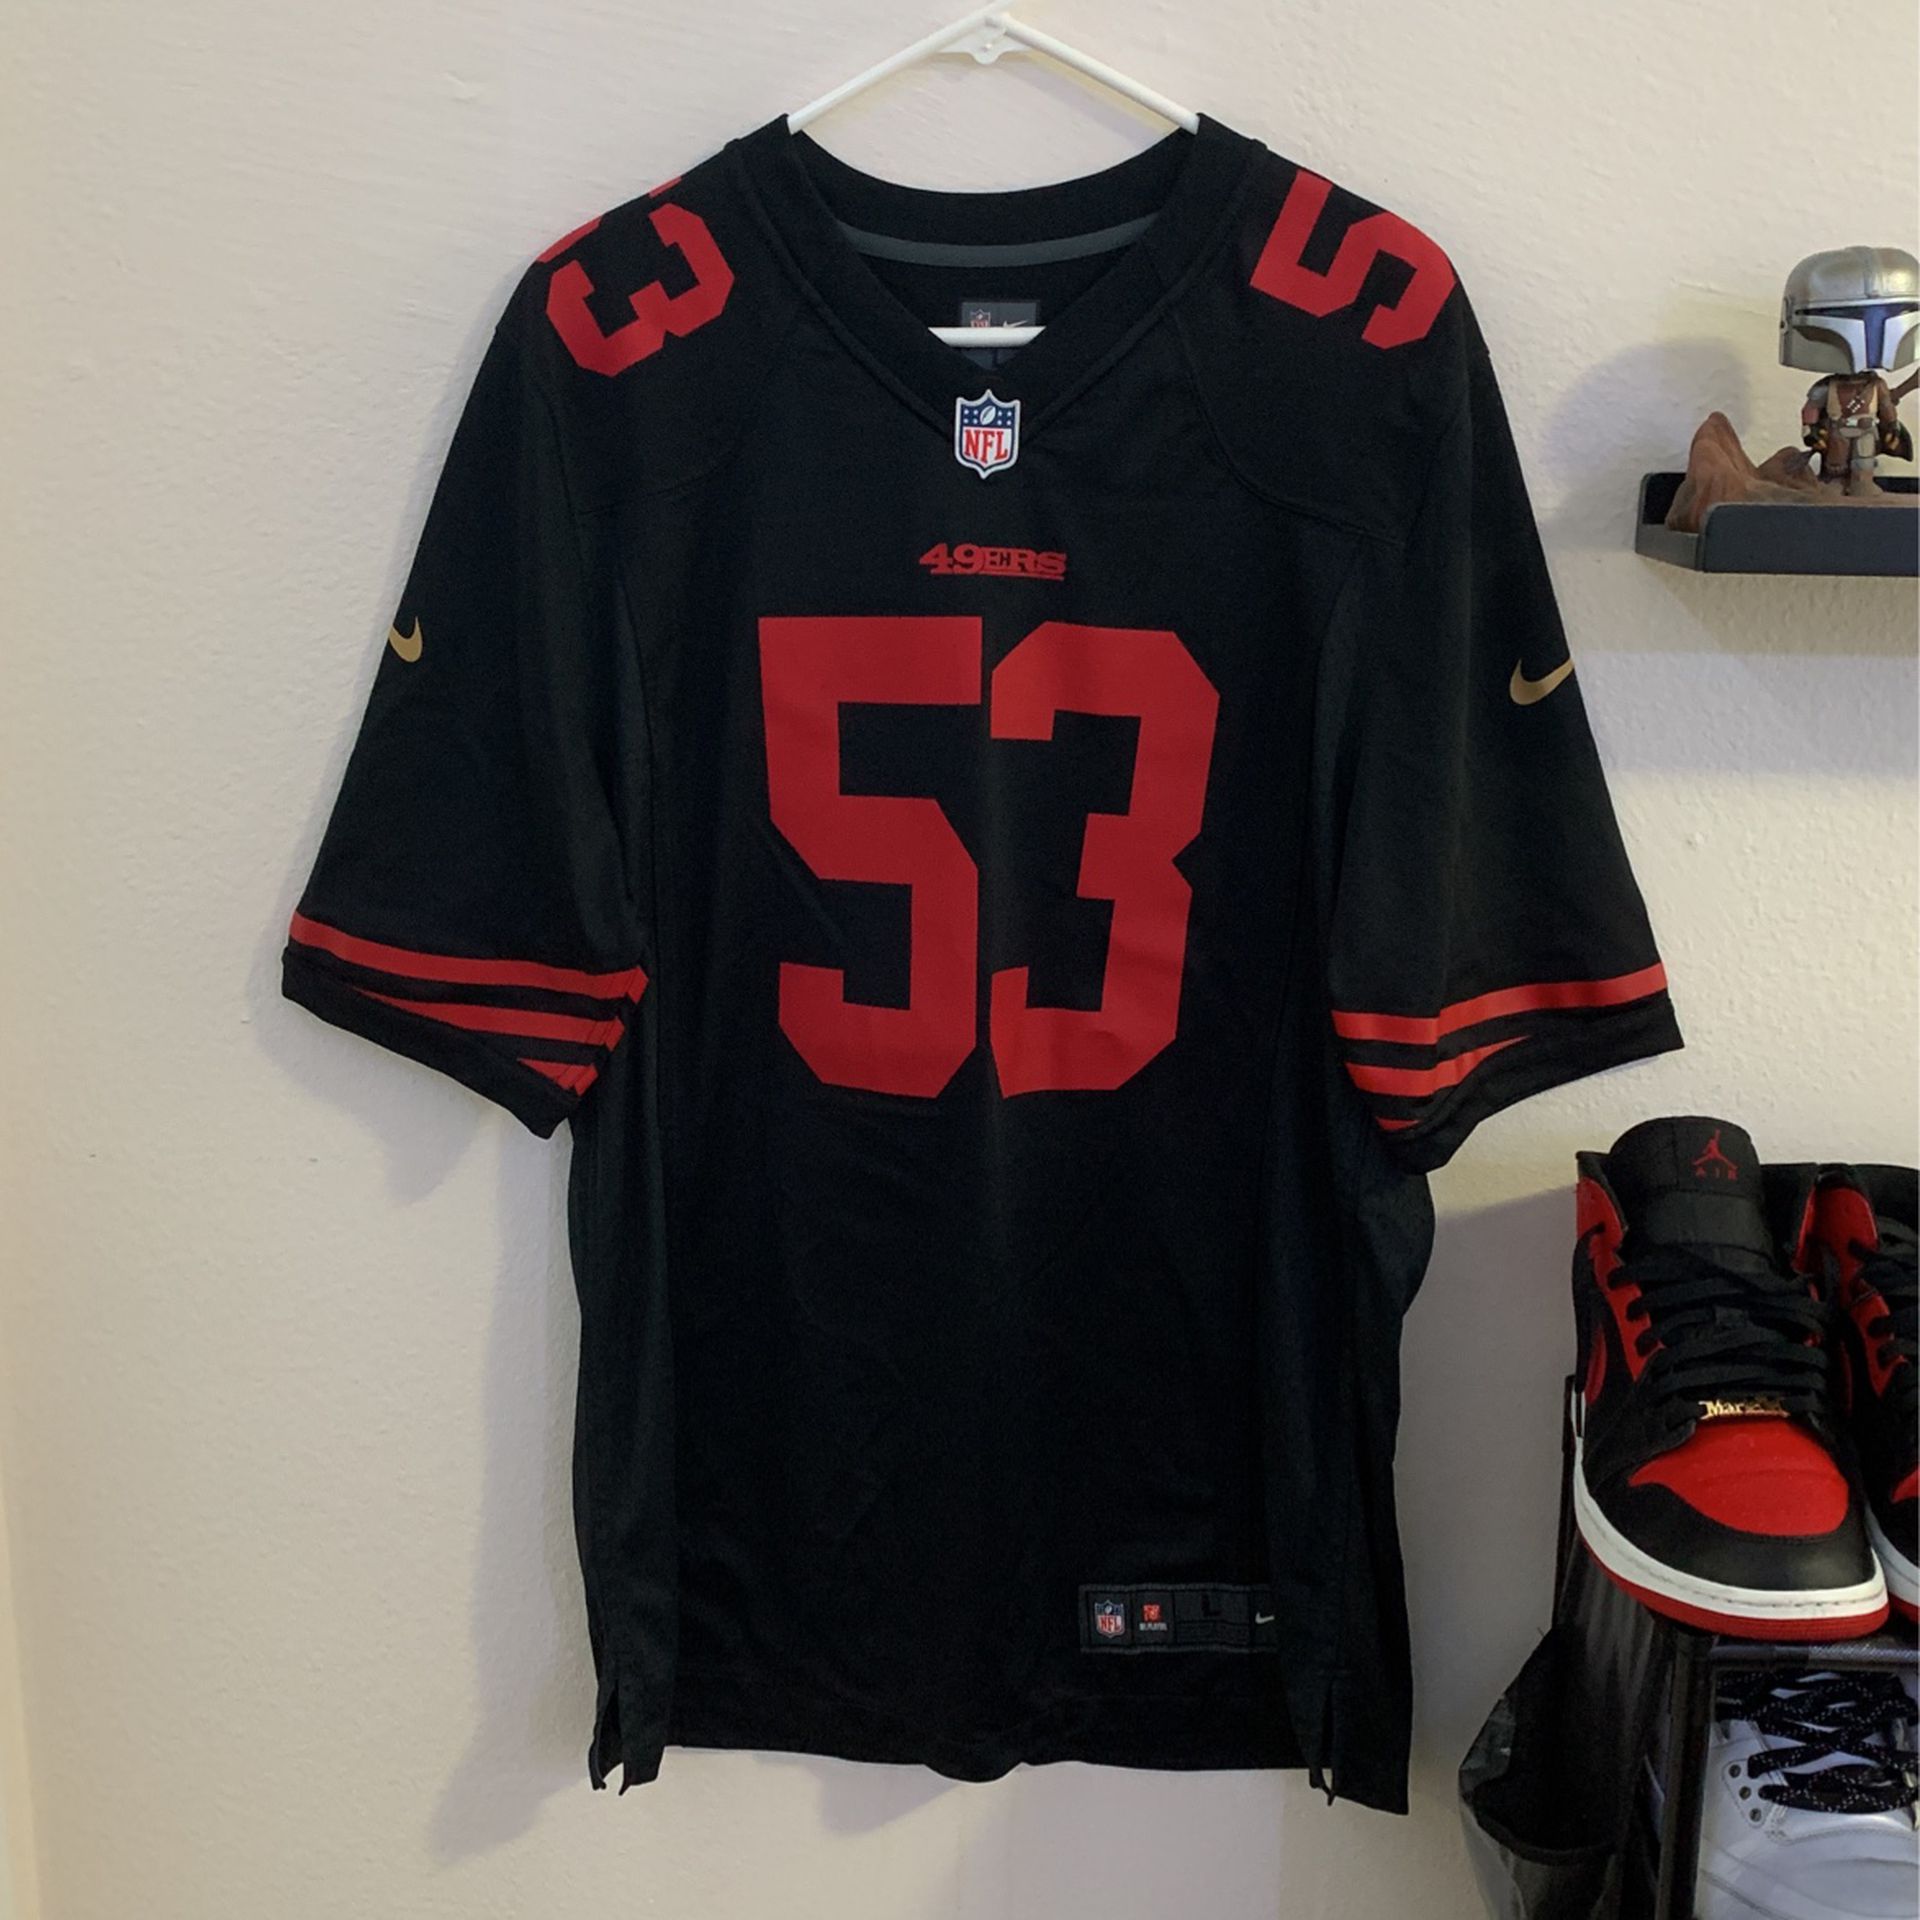 NaVorro Bowman Jersey 2019 San Francisco 49ers Black And Red